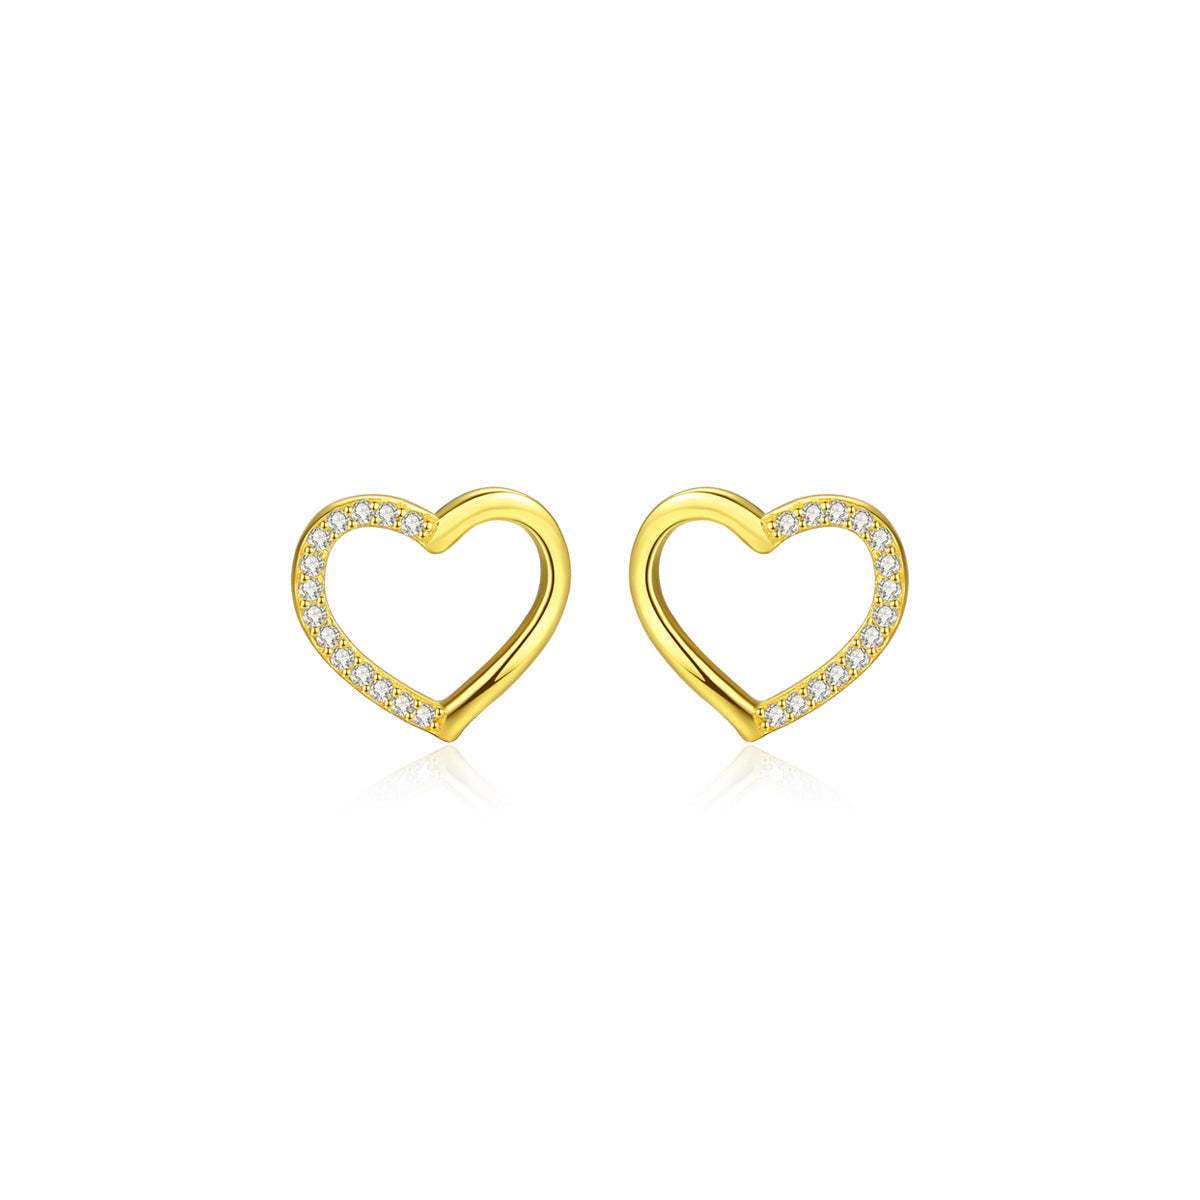 Amie Gold Stud Earrings for Women | PEROZ Accessories